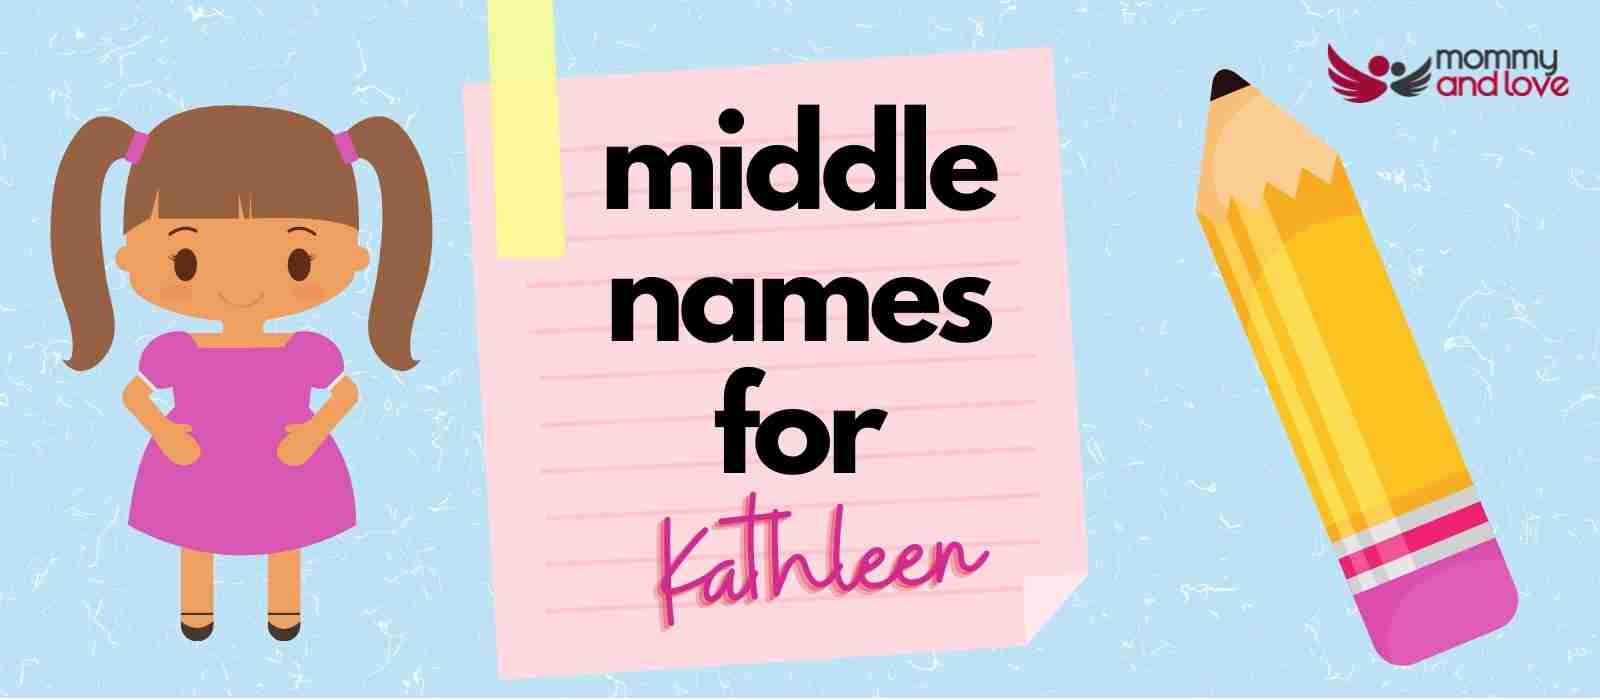 Middle Names for Kathleen